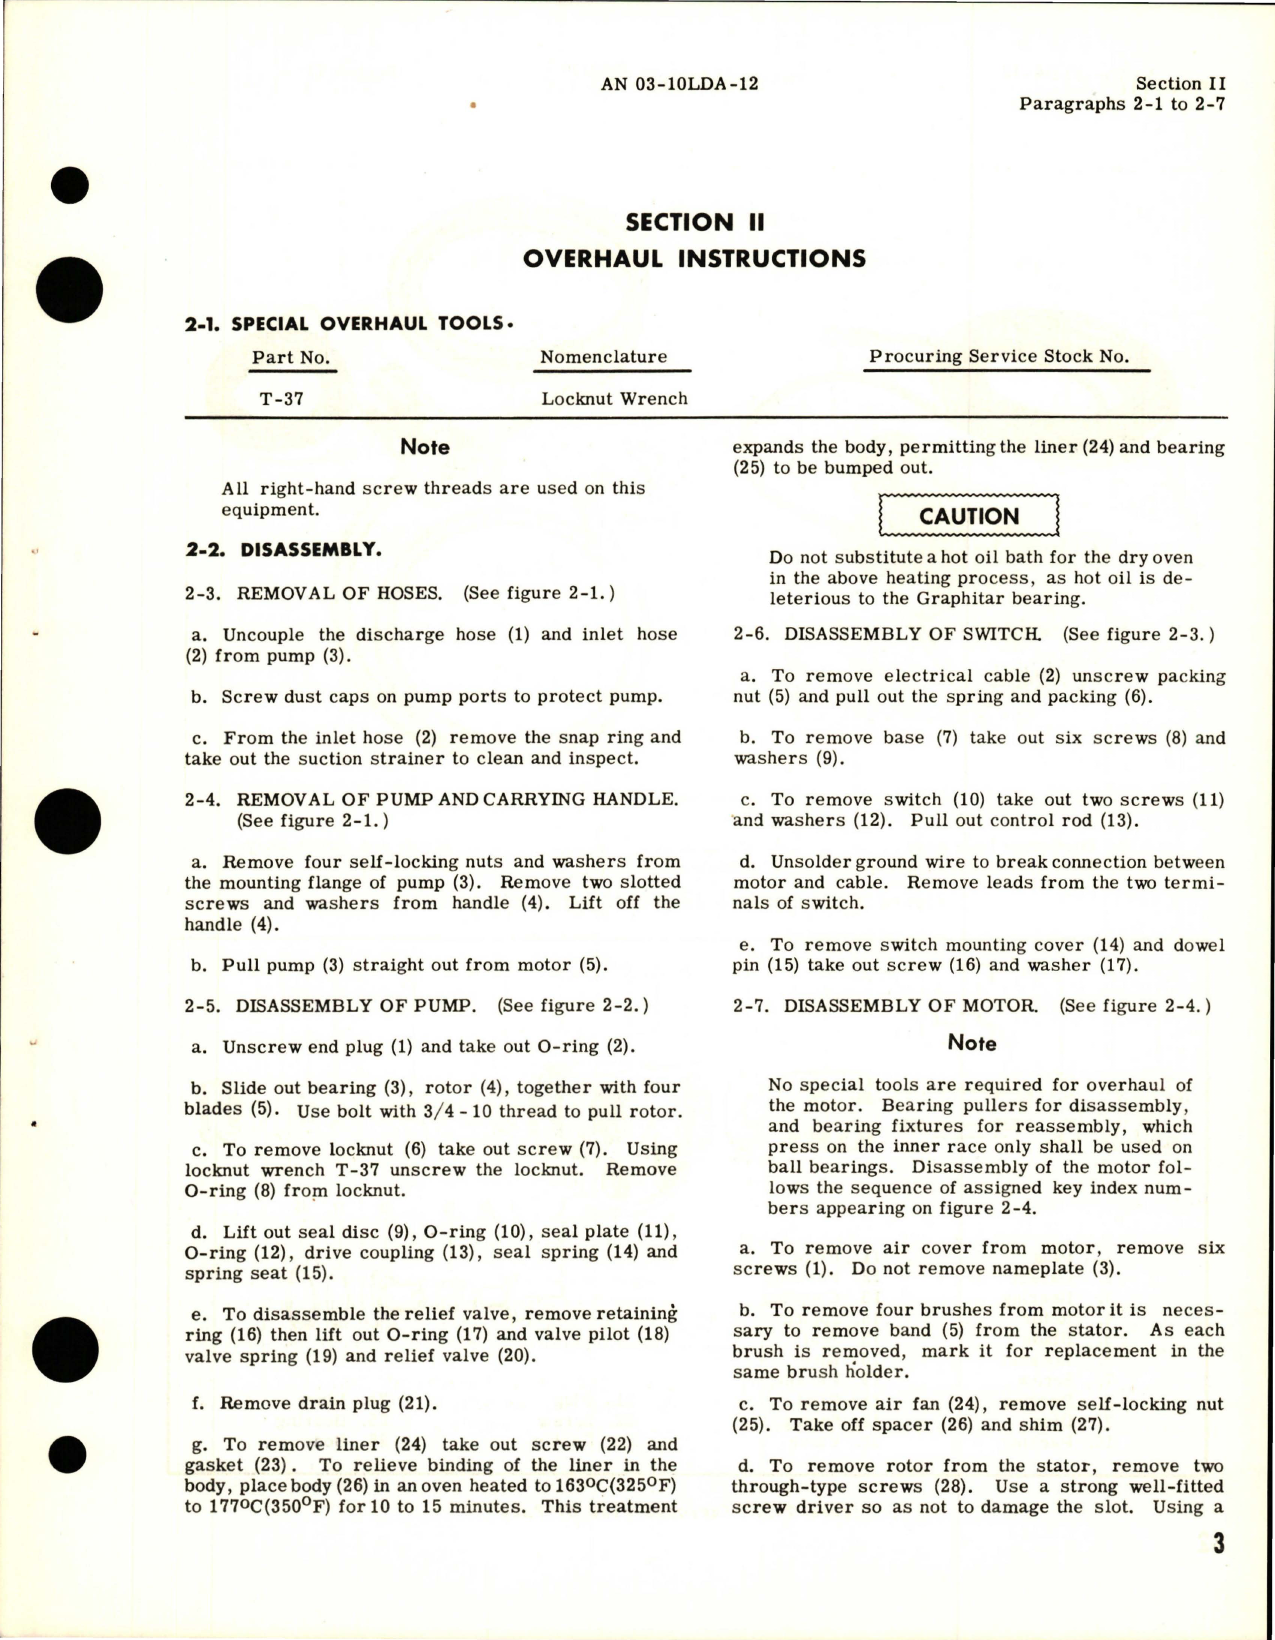 Sample page 7 from AirCorps Library document: Overhaul Instructions for Portable Bilge & Refueling Unit - Model RR-9110